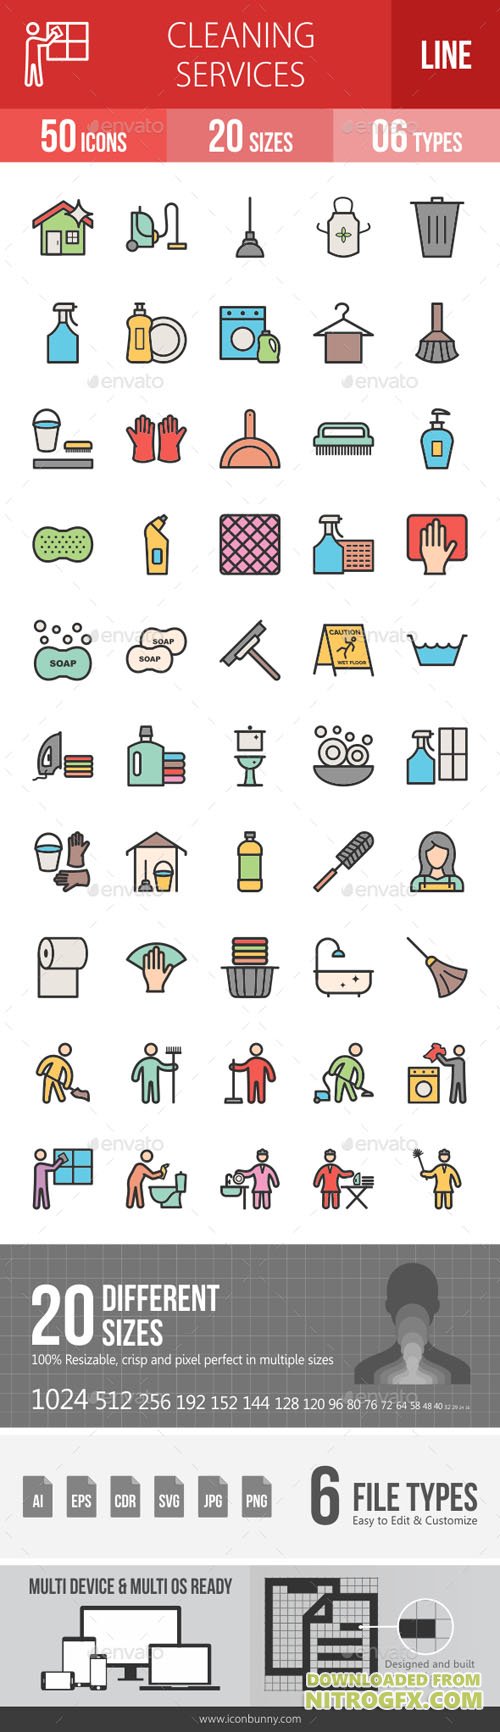 Cleaning Services Line Filled Icons 19267741